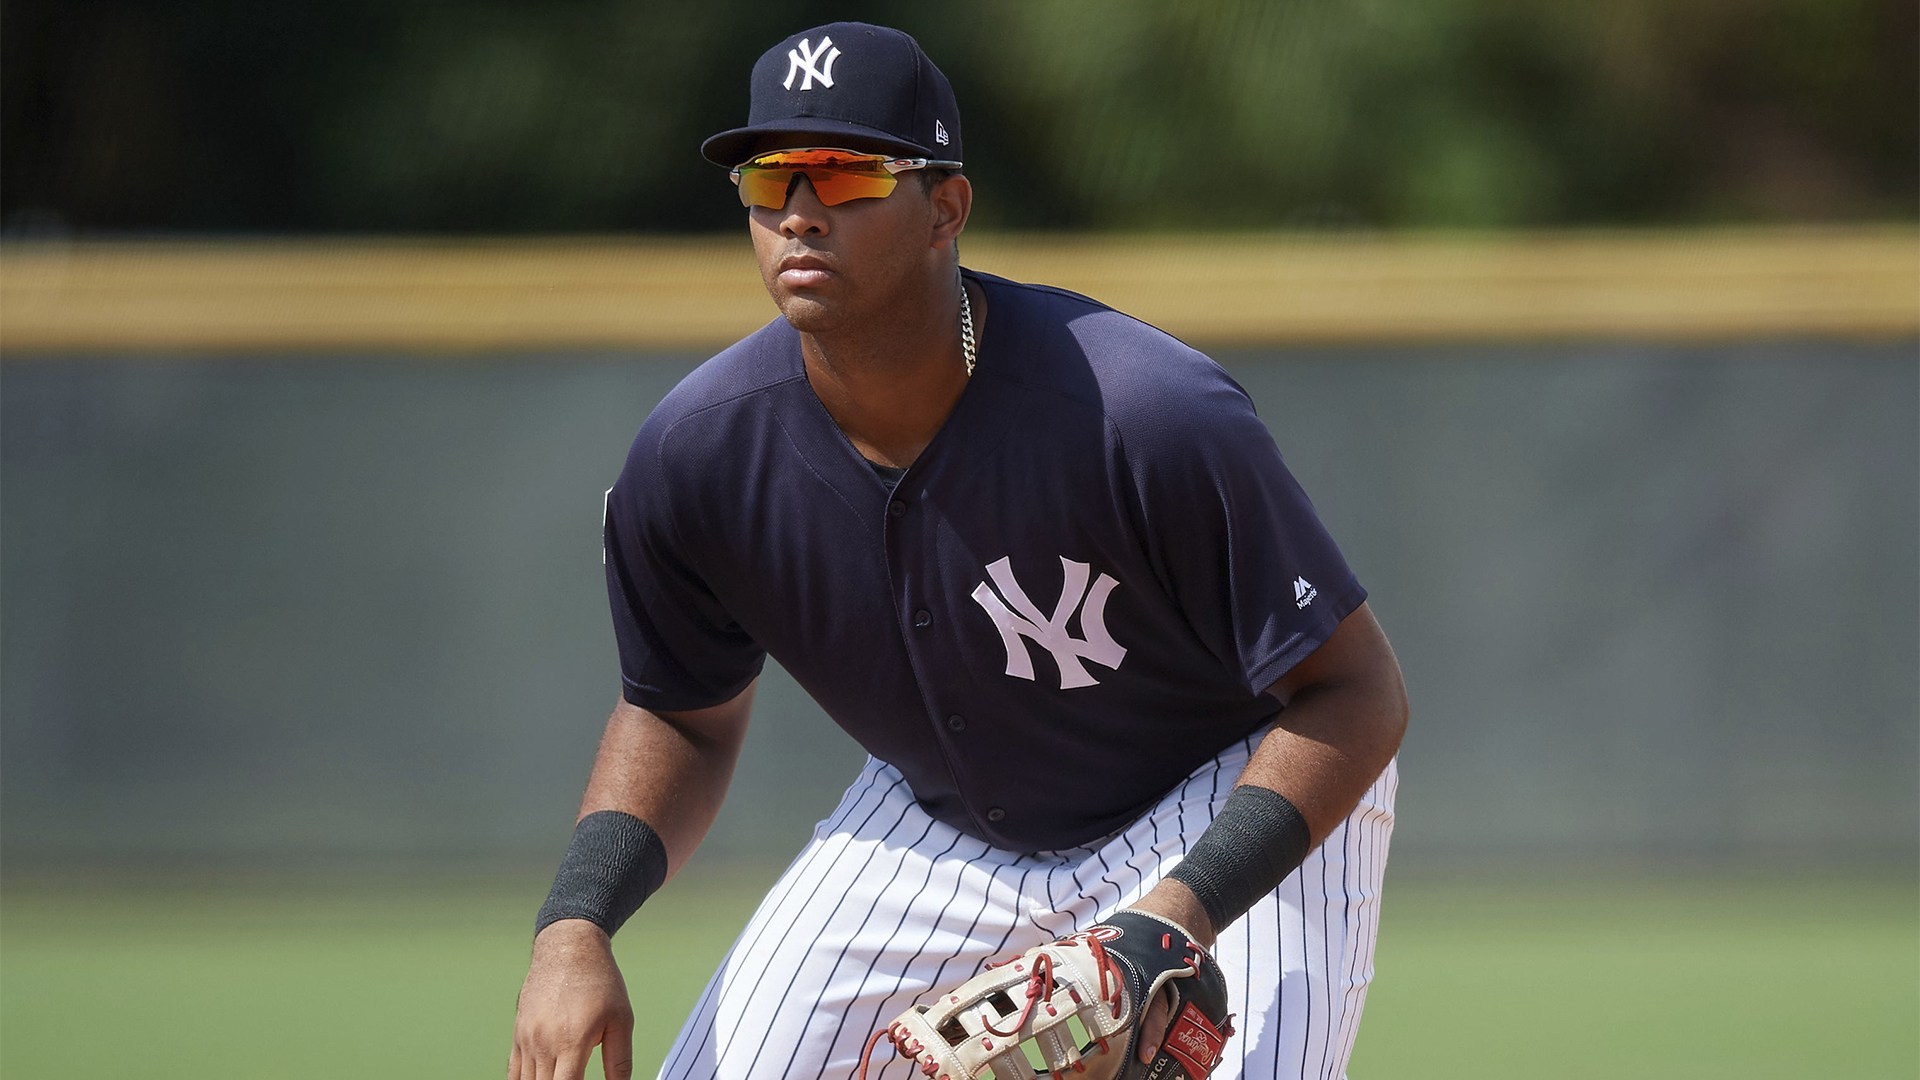 Class of 2014 prospects who let the Yankees down